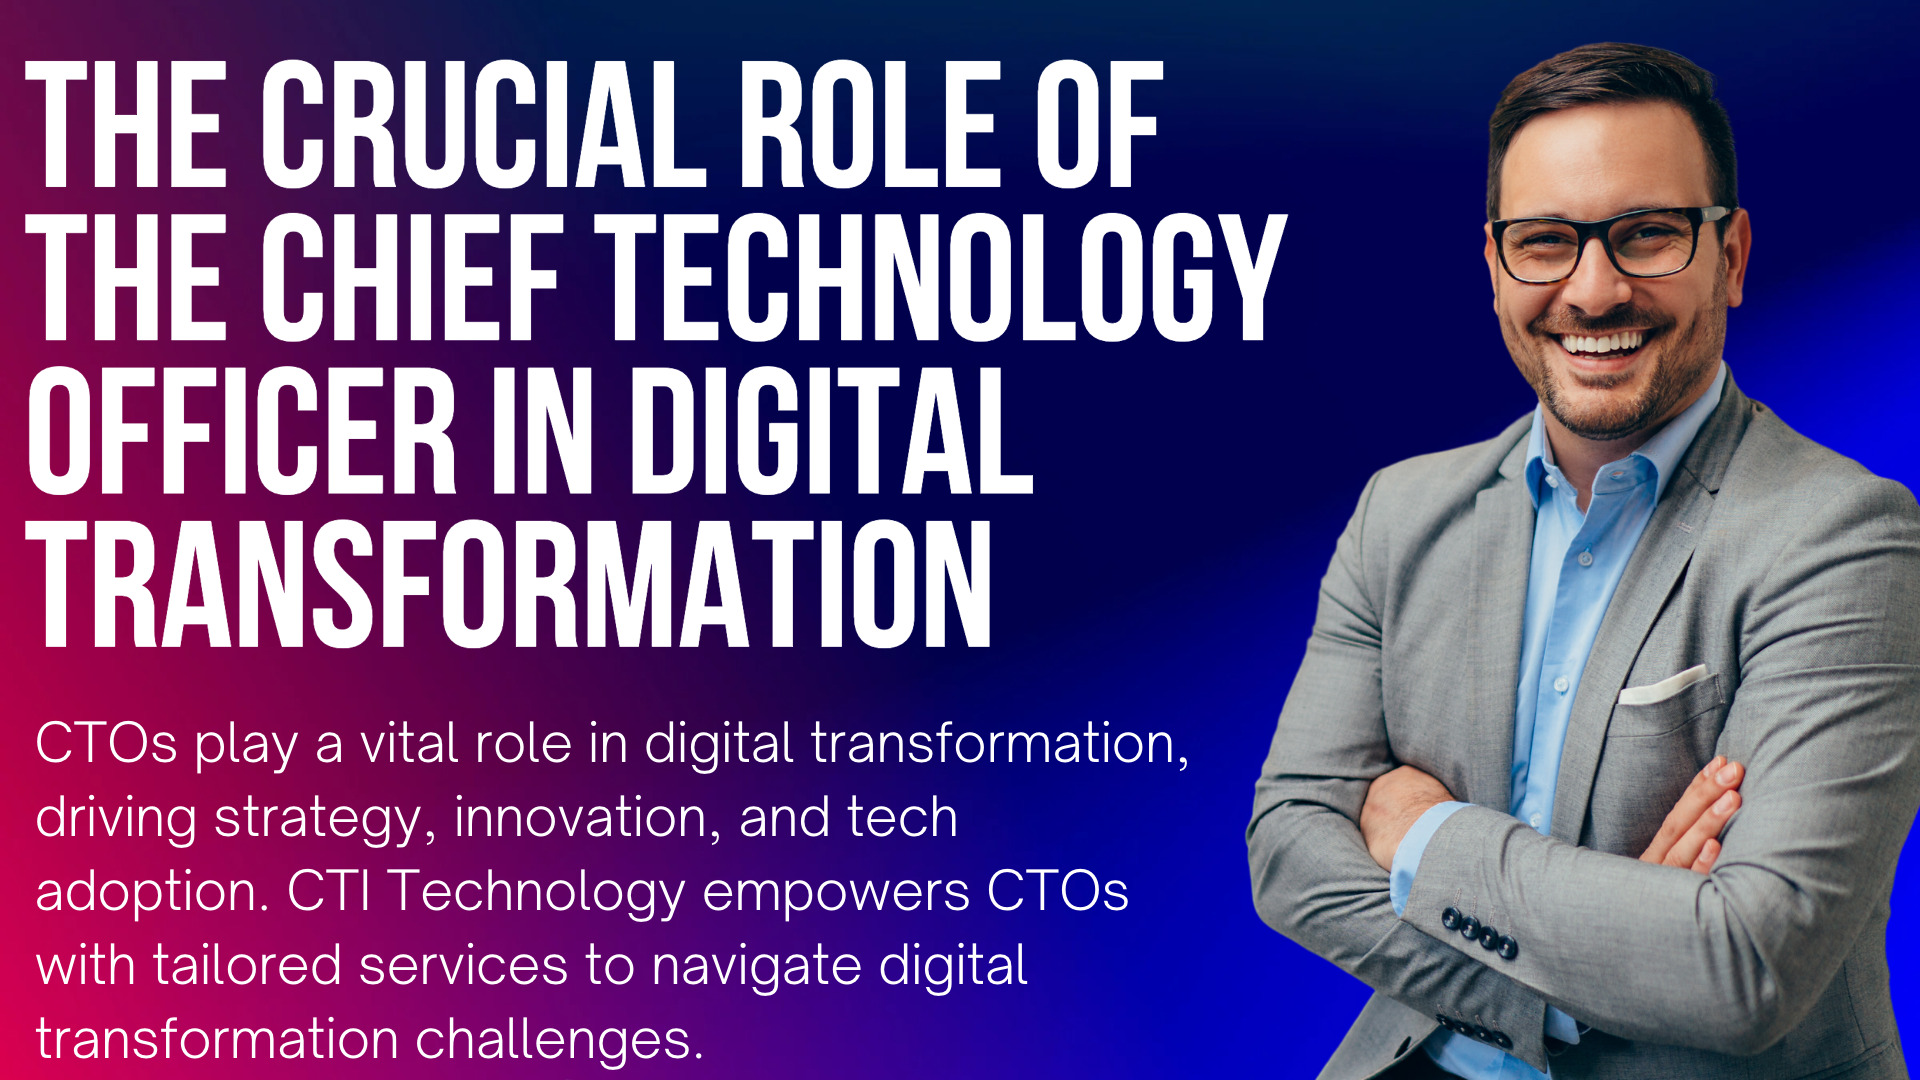 The Crucial Role of the Chief Technology Officer in Digital Transformation